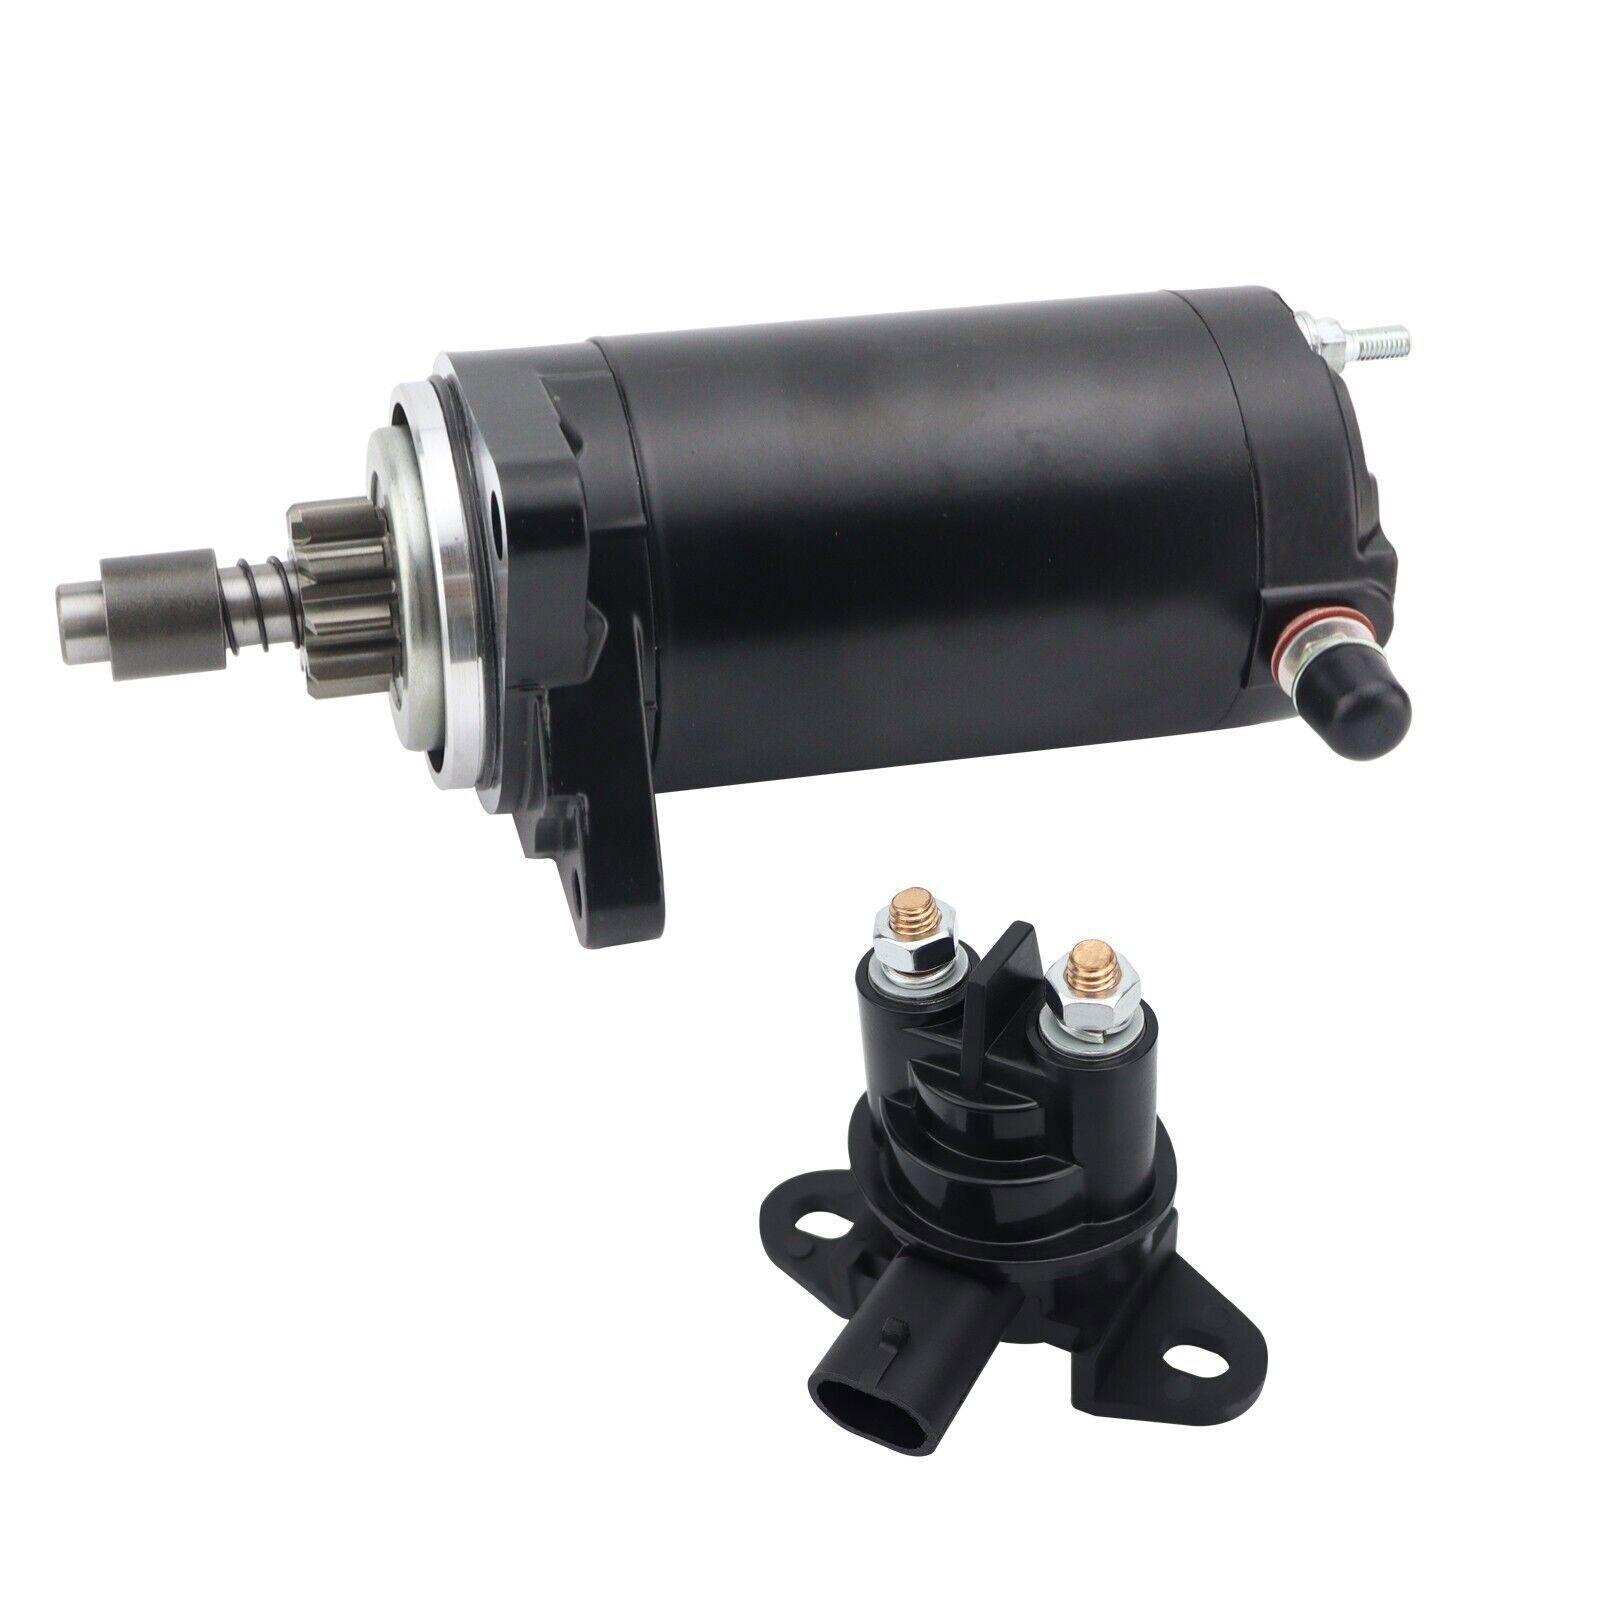 1995-1996 Starter Motor Replacement for Sea-Doo GTS SP SPI 581cc with Relay